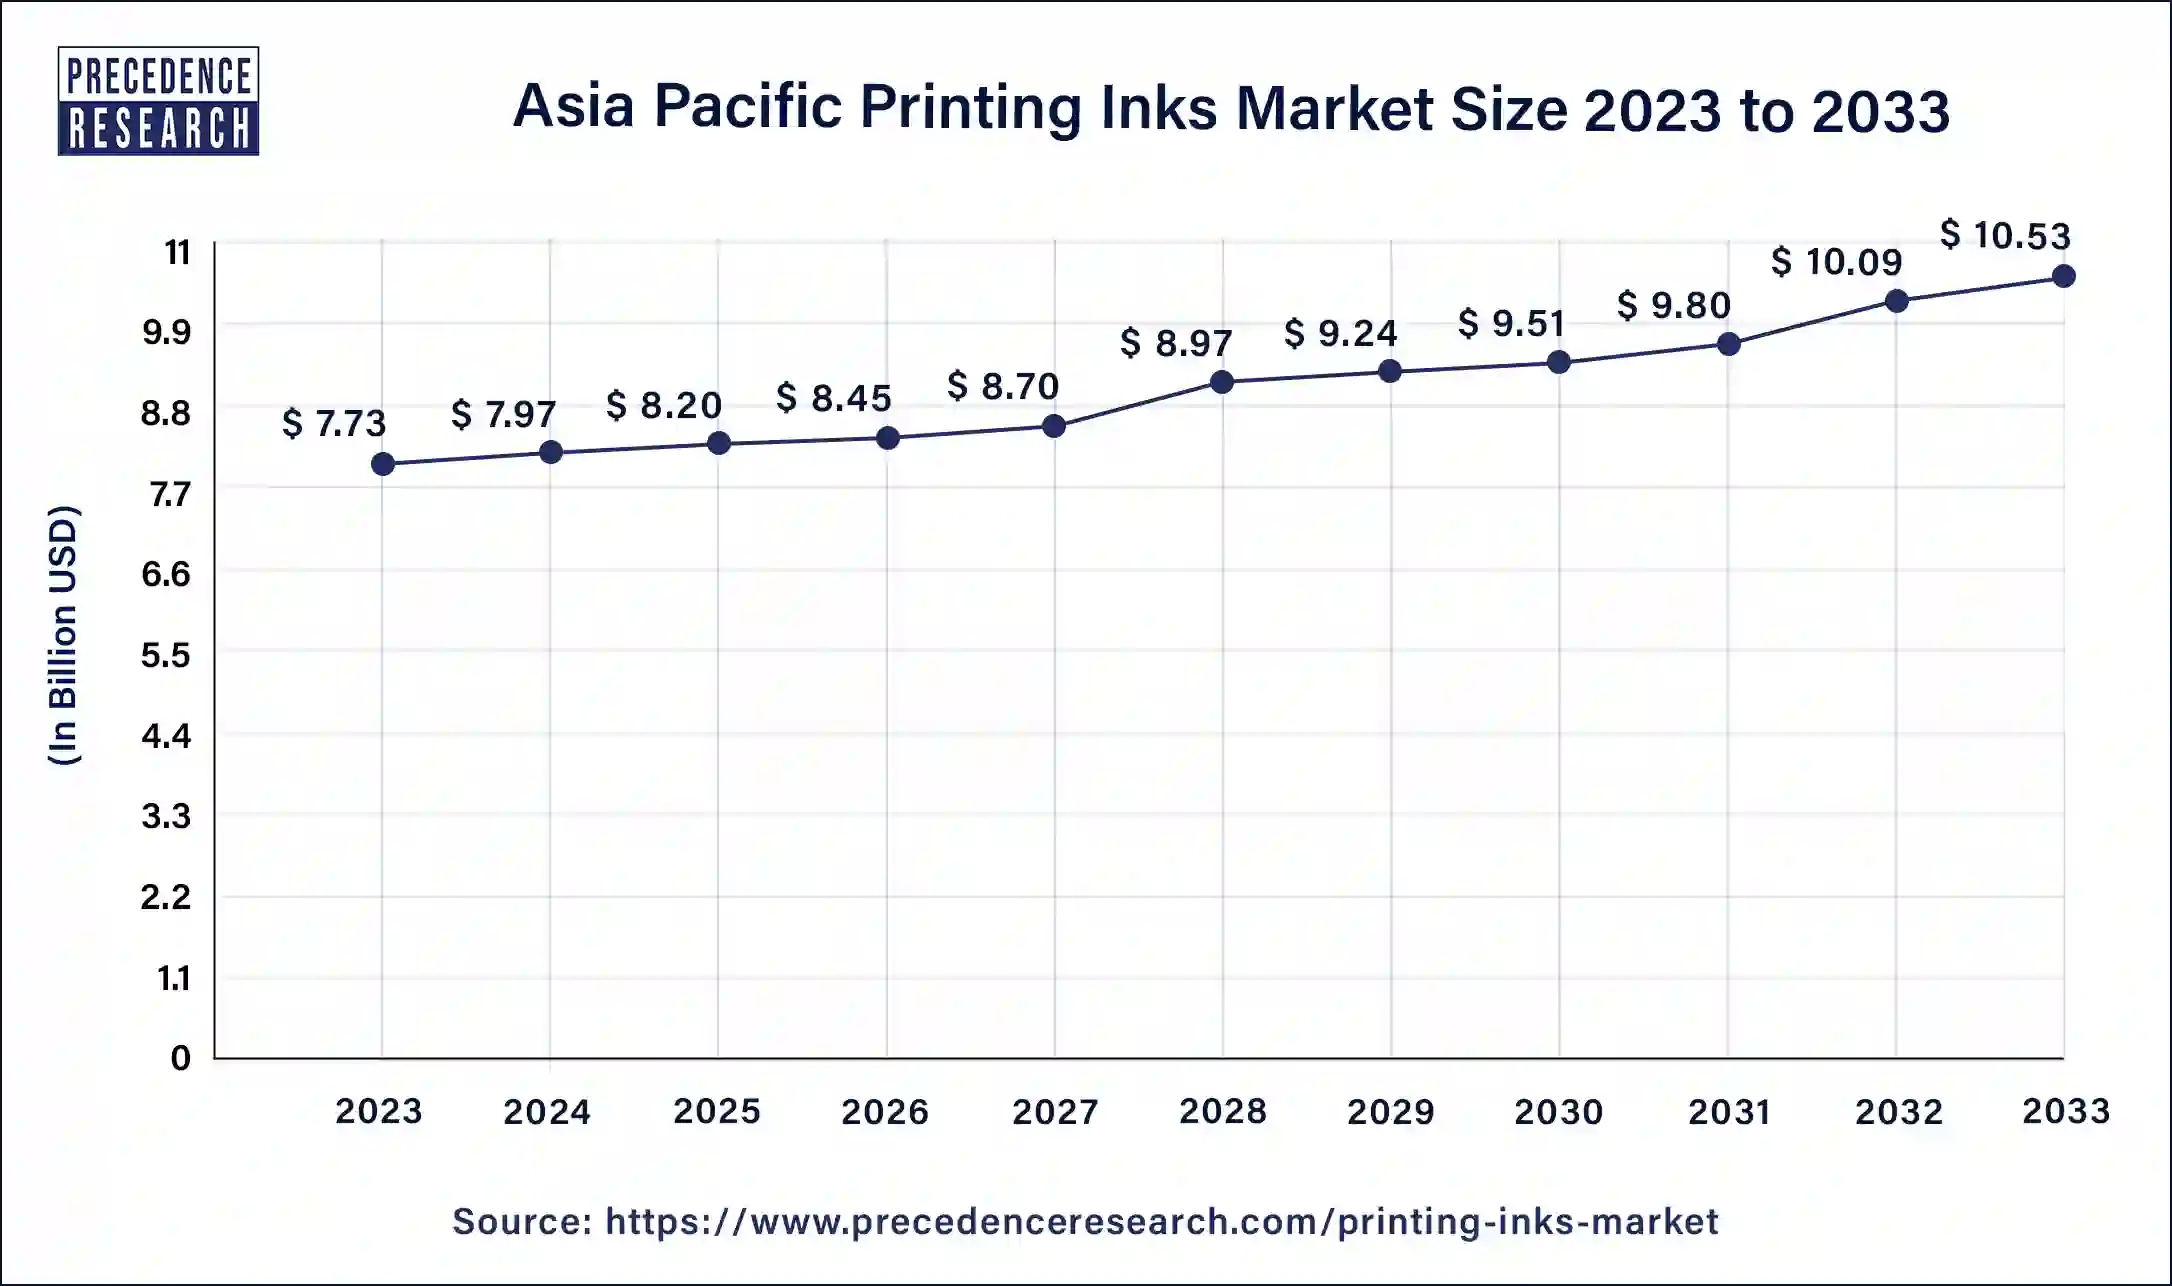 Asia Pacific Printing Inks Market Size 2024 to 2033